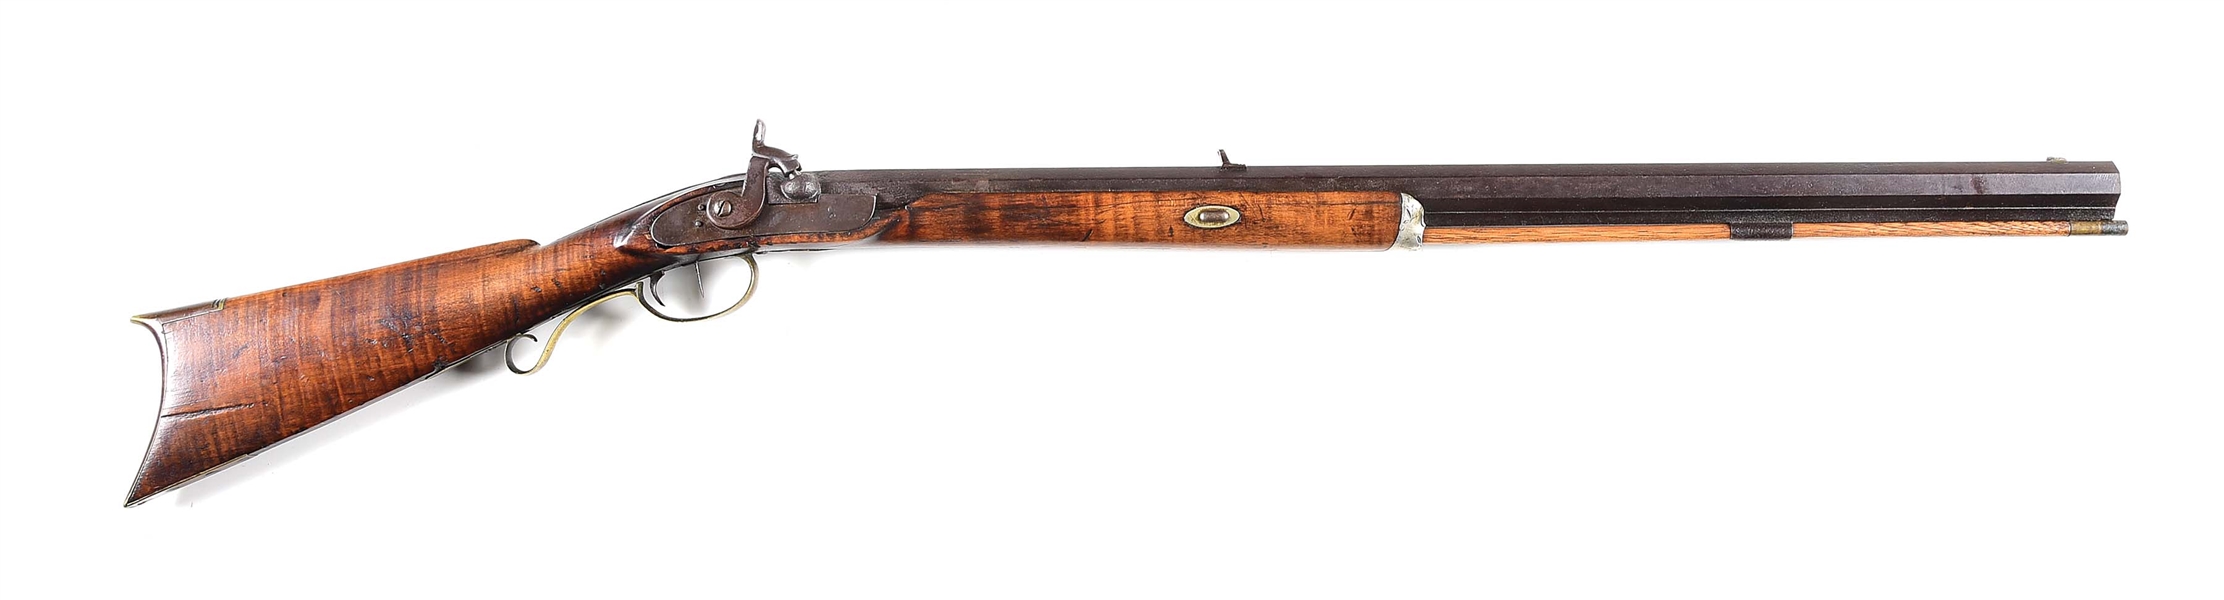 (A) HAWKEN ATTRIBUTED PERCUSSION PLAINS RIFLE.